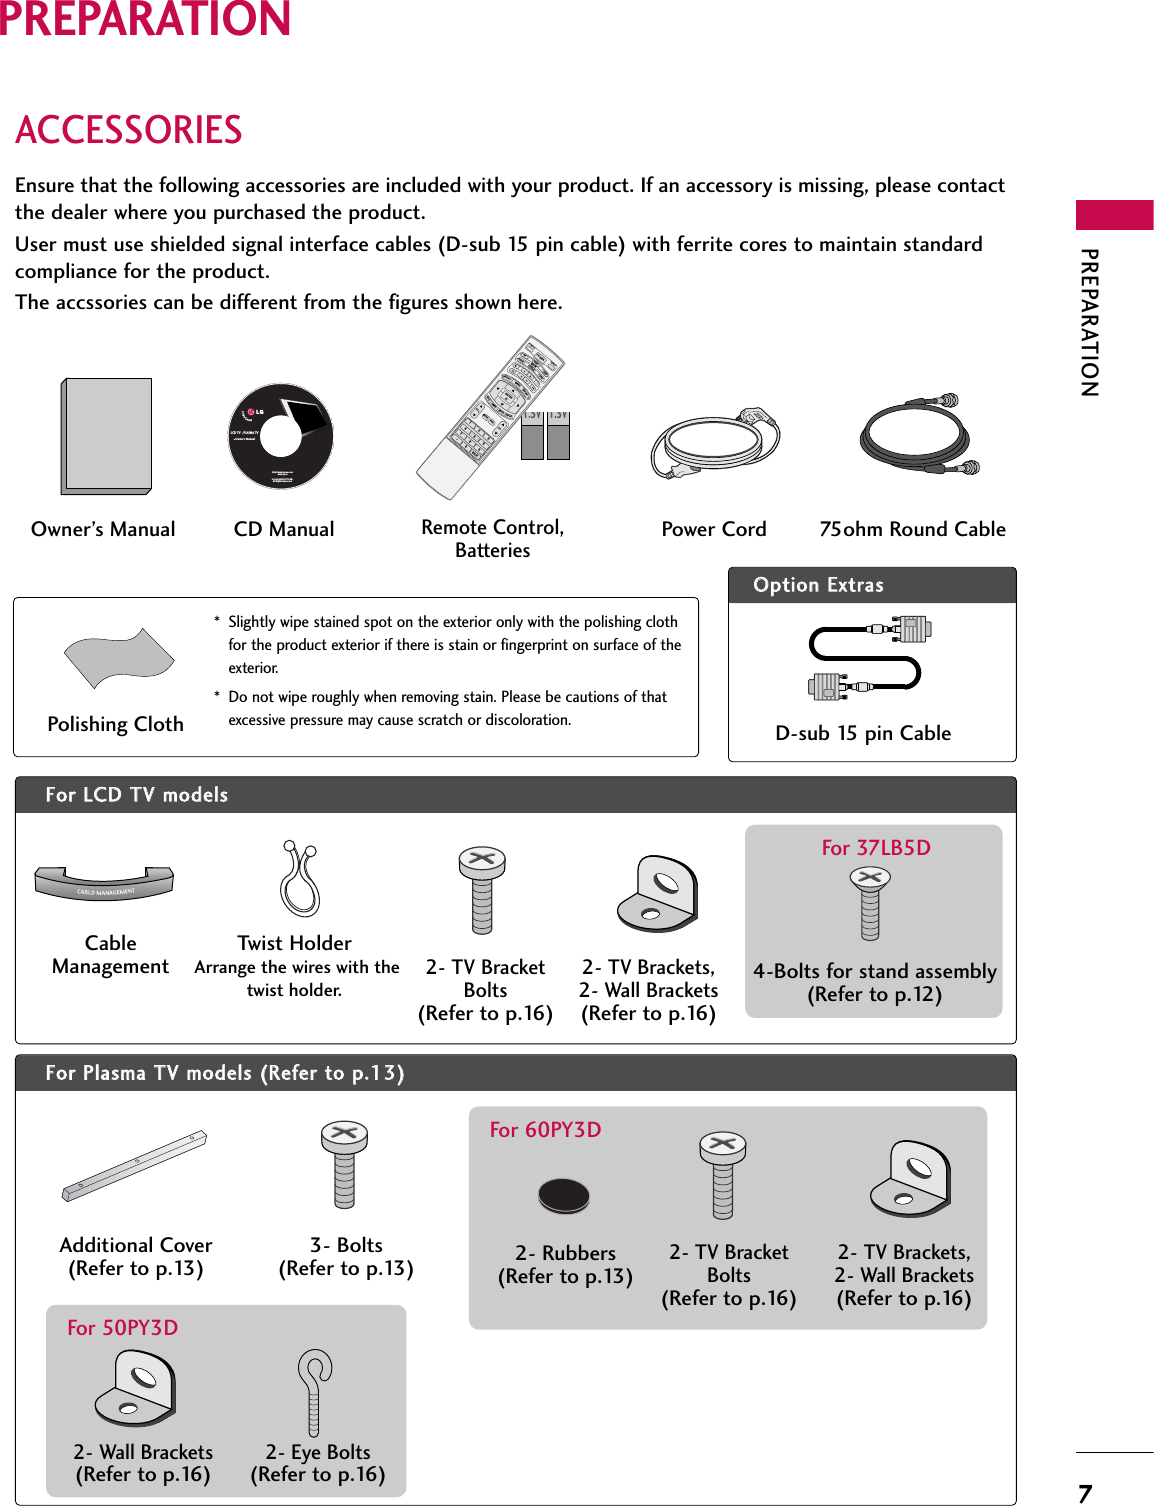 PREPARATION7PREPARATIONACCESSORIESEnsure that the following accessories are included with your product. If an accessory is missing, please contactthe dealer where you purchased the product. User must use shielded signal interface cables (D-sub 15 pin cable) with ferrite cores to maintain standardcompliance for the product.The accssories can be different from the figures shown here.OOppttiioonn EExxttrraassFFoorr LLCCDD TTVV mmooddeellssCableManagementTwist HolderArrange the wires with thetwist holder. 4-Bolts for stand assembly(Refer to p.12)For 37LB5DFFoorr PPllaassmmaa TTVV mmooddeellss ((RReeffeerr ttoo pp..1133))Additional Cover(Refer to p.13)3- Bolts(Refer to p.13)* Slightly wipe stained spot on the exterior only with the polishing clothfor the product exterior if there is stain or fingerprint on surface of theexterior.* Do not wipe roughly when removing stain. Please be cautions of thatexcessive pressure may cause scratch or discoloration.Polishing ClothLCD TV    PLASMA TVOwner&apos;s Manualhttp://www.lgusa.comwww.lg.caCopyright© 2007 LGE,All Rights Reserved.D-sub 15 pin Cable1.5V 1.5VOwner’s Manual Power Cord 75ohm Round CableRemote Control,Batteries1 2 3     456    7809   BACKVOLCHMUTEFAVBRIGHT -MENUBRIGHT +ENTEREXITTIMERRATIOSIMPLINKPOWERVCRTVDVDAUDIOCABLESTBMODETV INPUTINPUT CHFAVMENUBRIGHT +ENTERTTIMERRATIOSIMPLINK1VOLMUTEEXITCD Manual2- TV BracketBolts(Refer to p.16)2- TV Brackets,2- Wall Brackets(Refer to p.16)2- Rubbers(Refer to p.13)For 60PY3D2- TV BracketBolts(Refer to p.16)2- TV Brackets,2- Wall Brackets(Refer to p.16)2- Wall Brackets(Refer to p.16)2- Eye Bolts(Refer to p.16)For 50PY3D